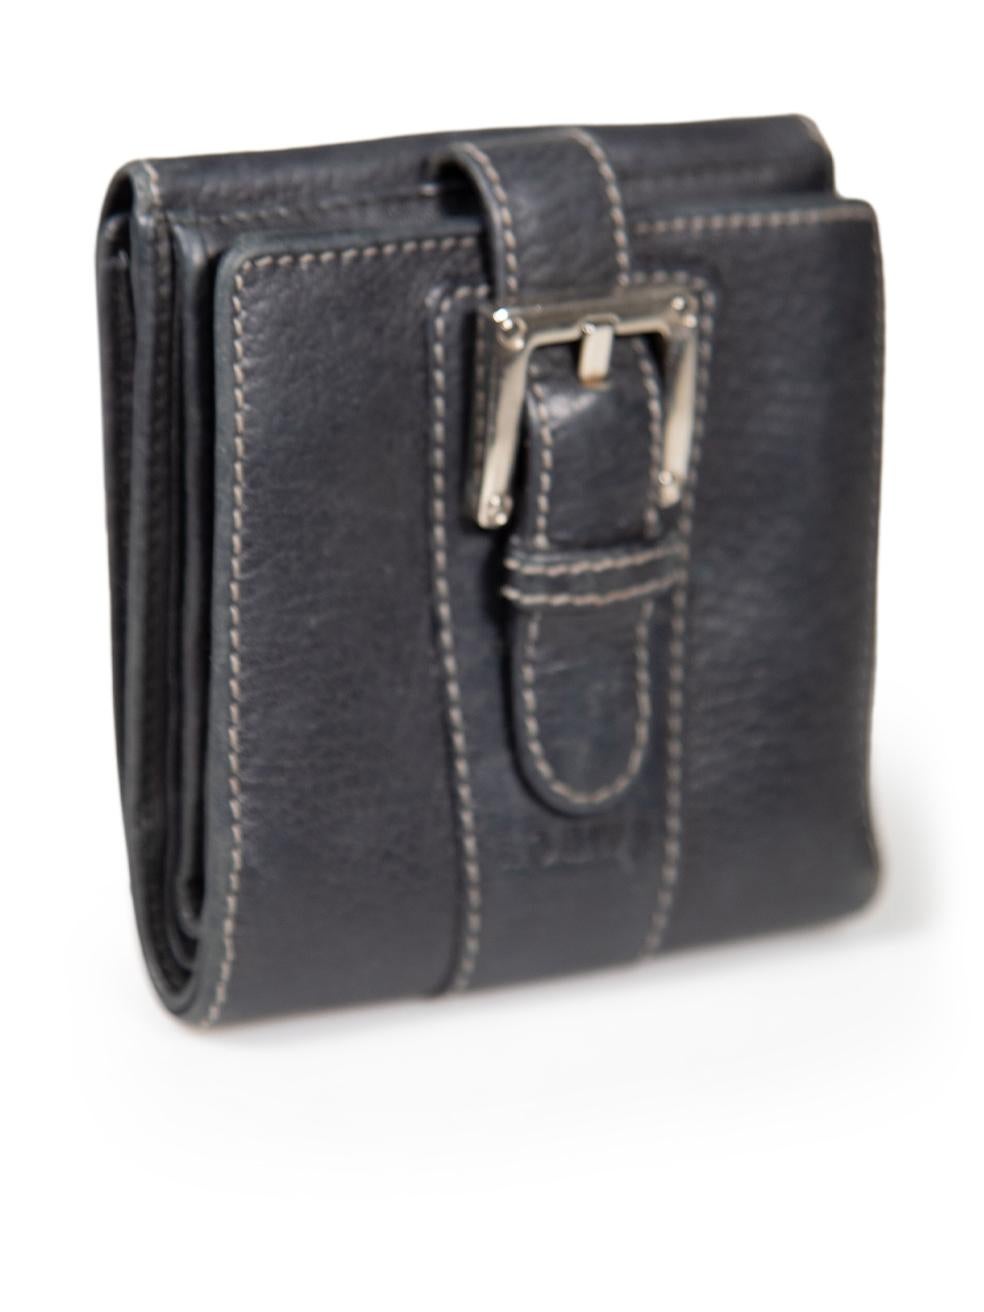 CONDITION is Good. Minor wear to wallet is evident. Light wear to strap with creasing. Abrasions are seen throughout on this used Loewe designer resale item.
 
 
 
 Details
 
 
 Navy
 
 Leather
 
 Wallet
 
 Bifold
 
 Buckle detail
 
 Snap button